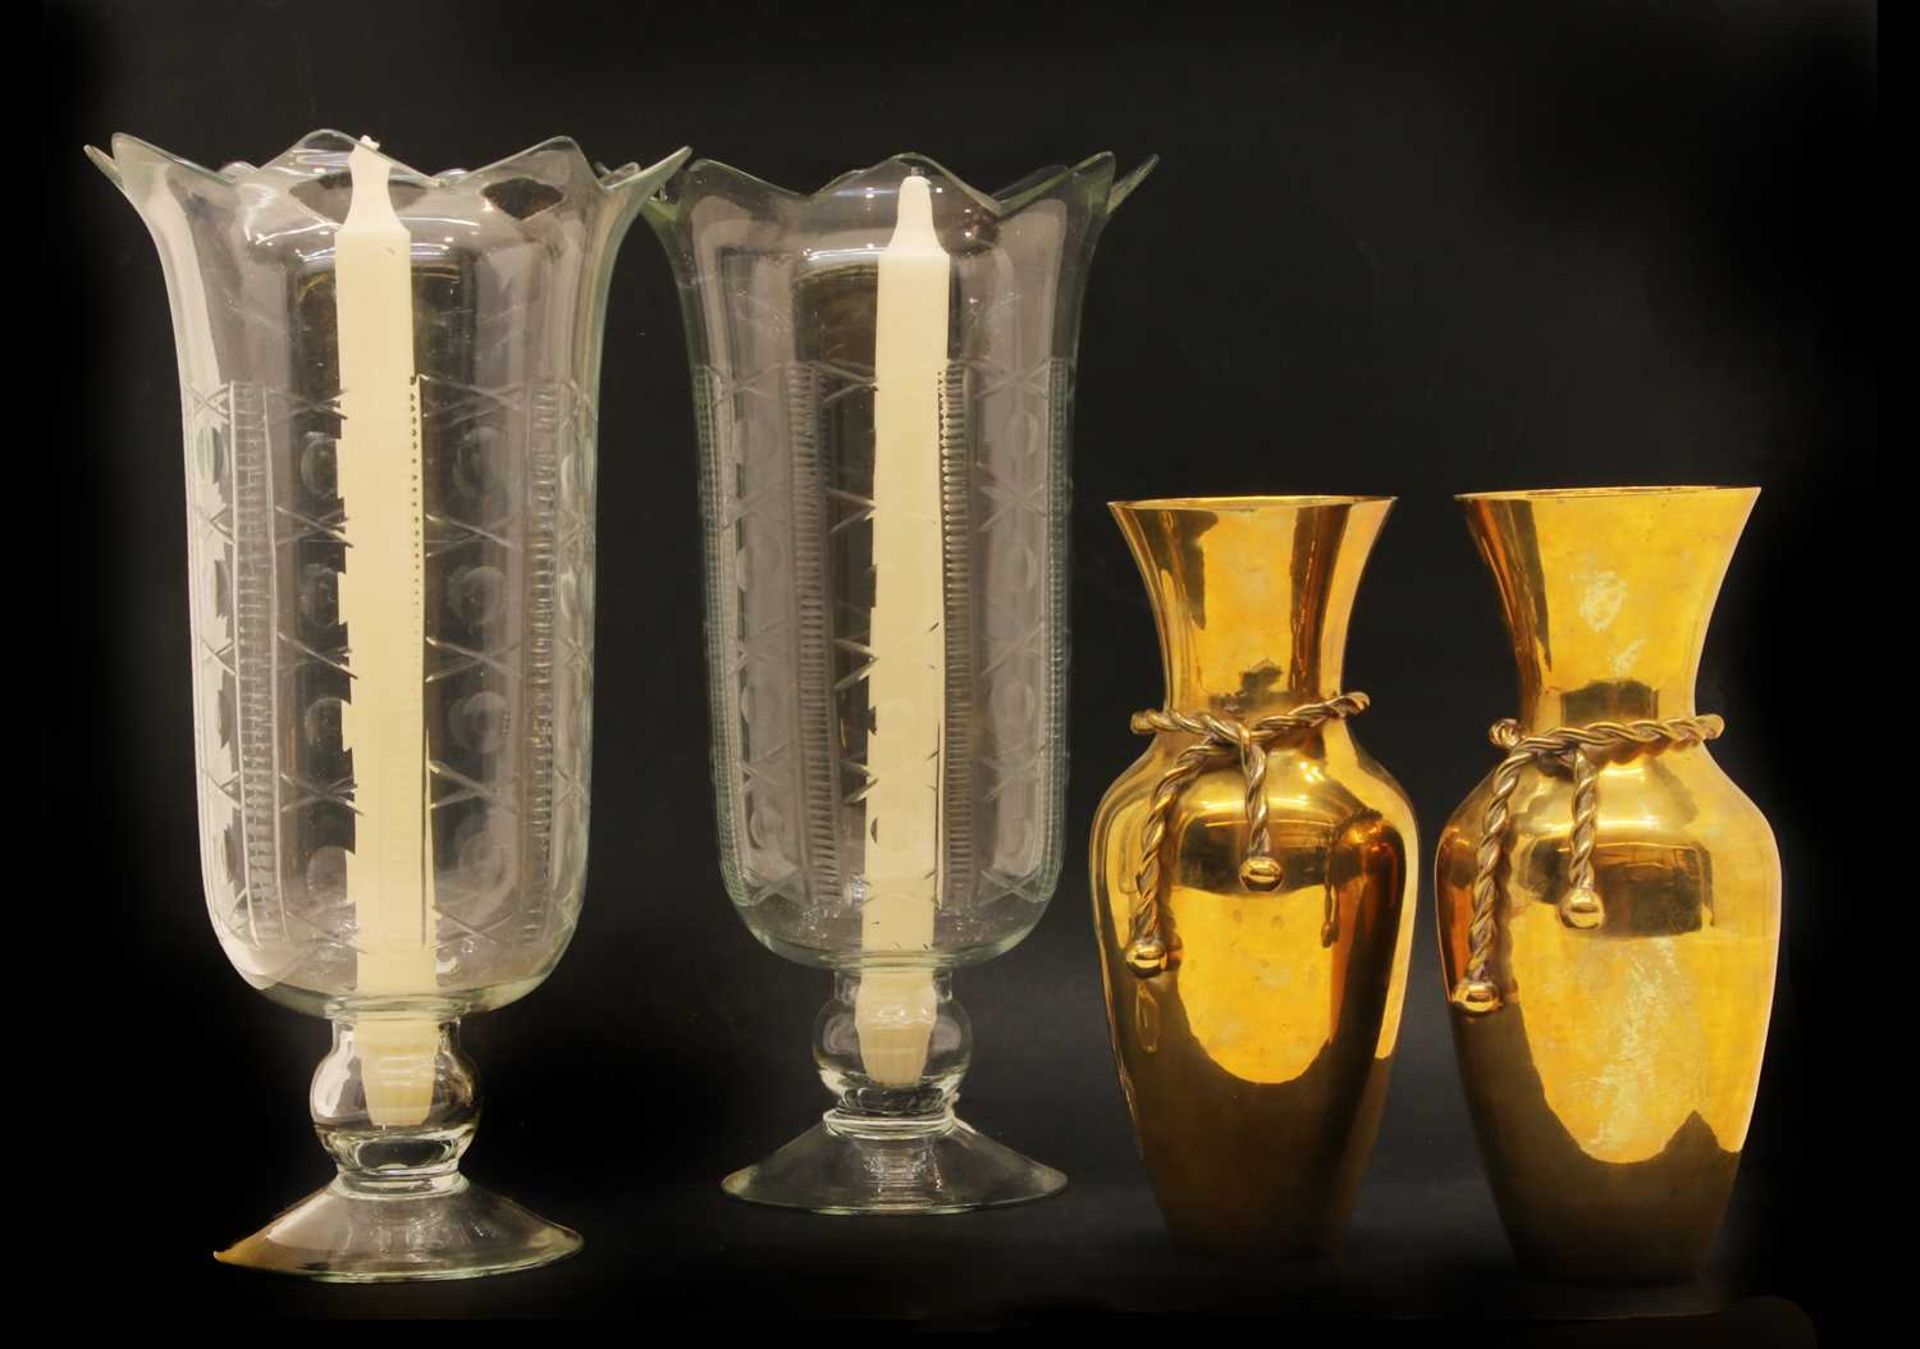 A pair of cut glass engraved hurricane lamps,